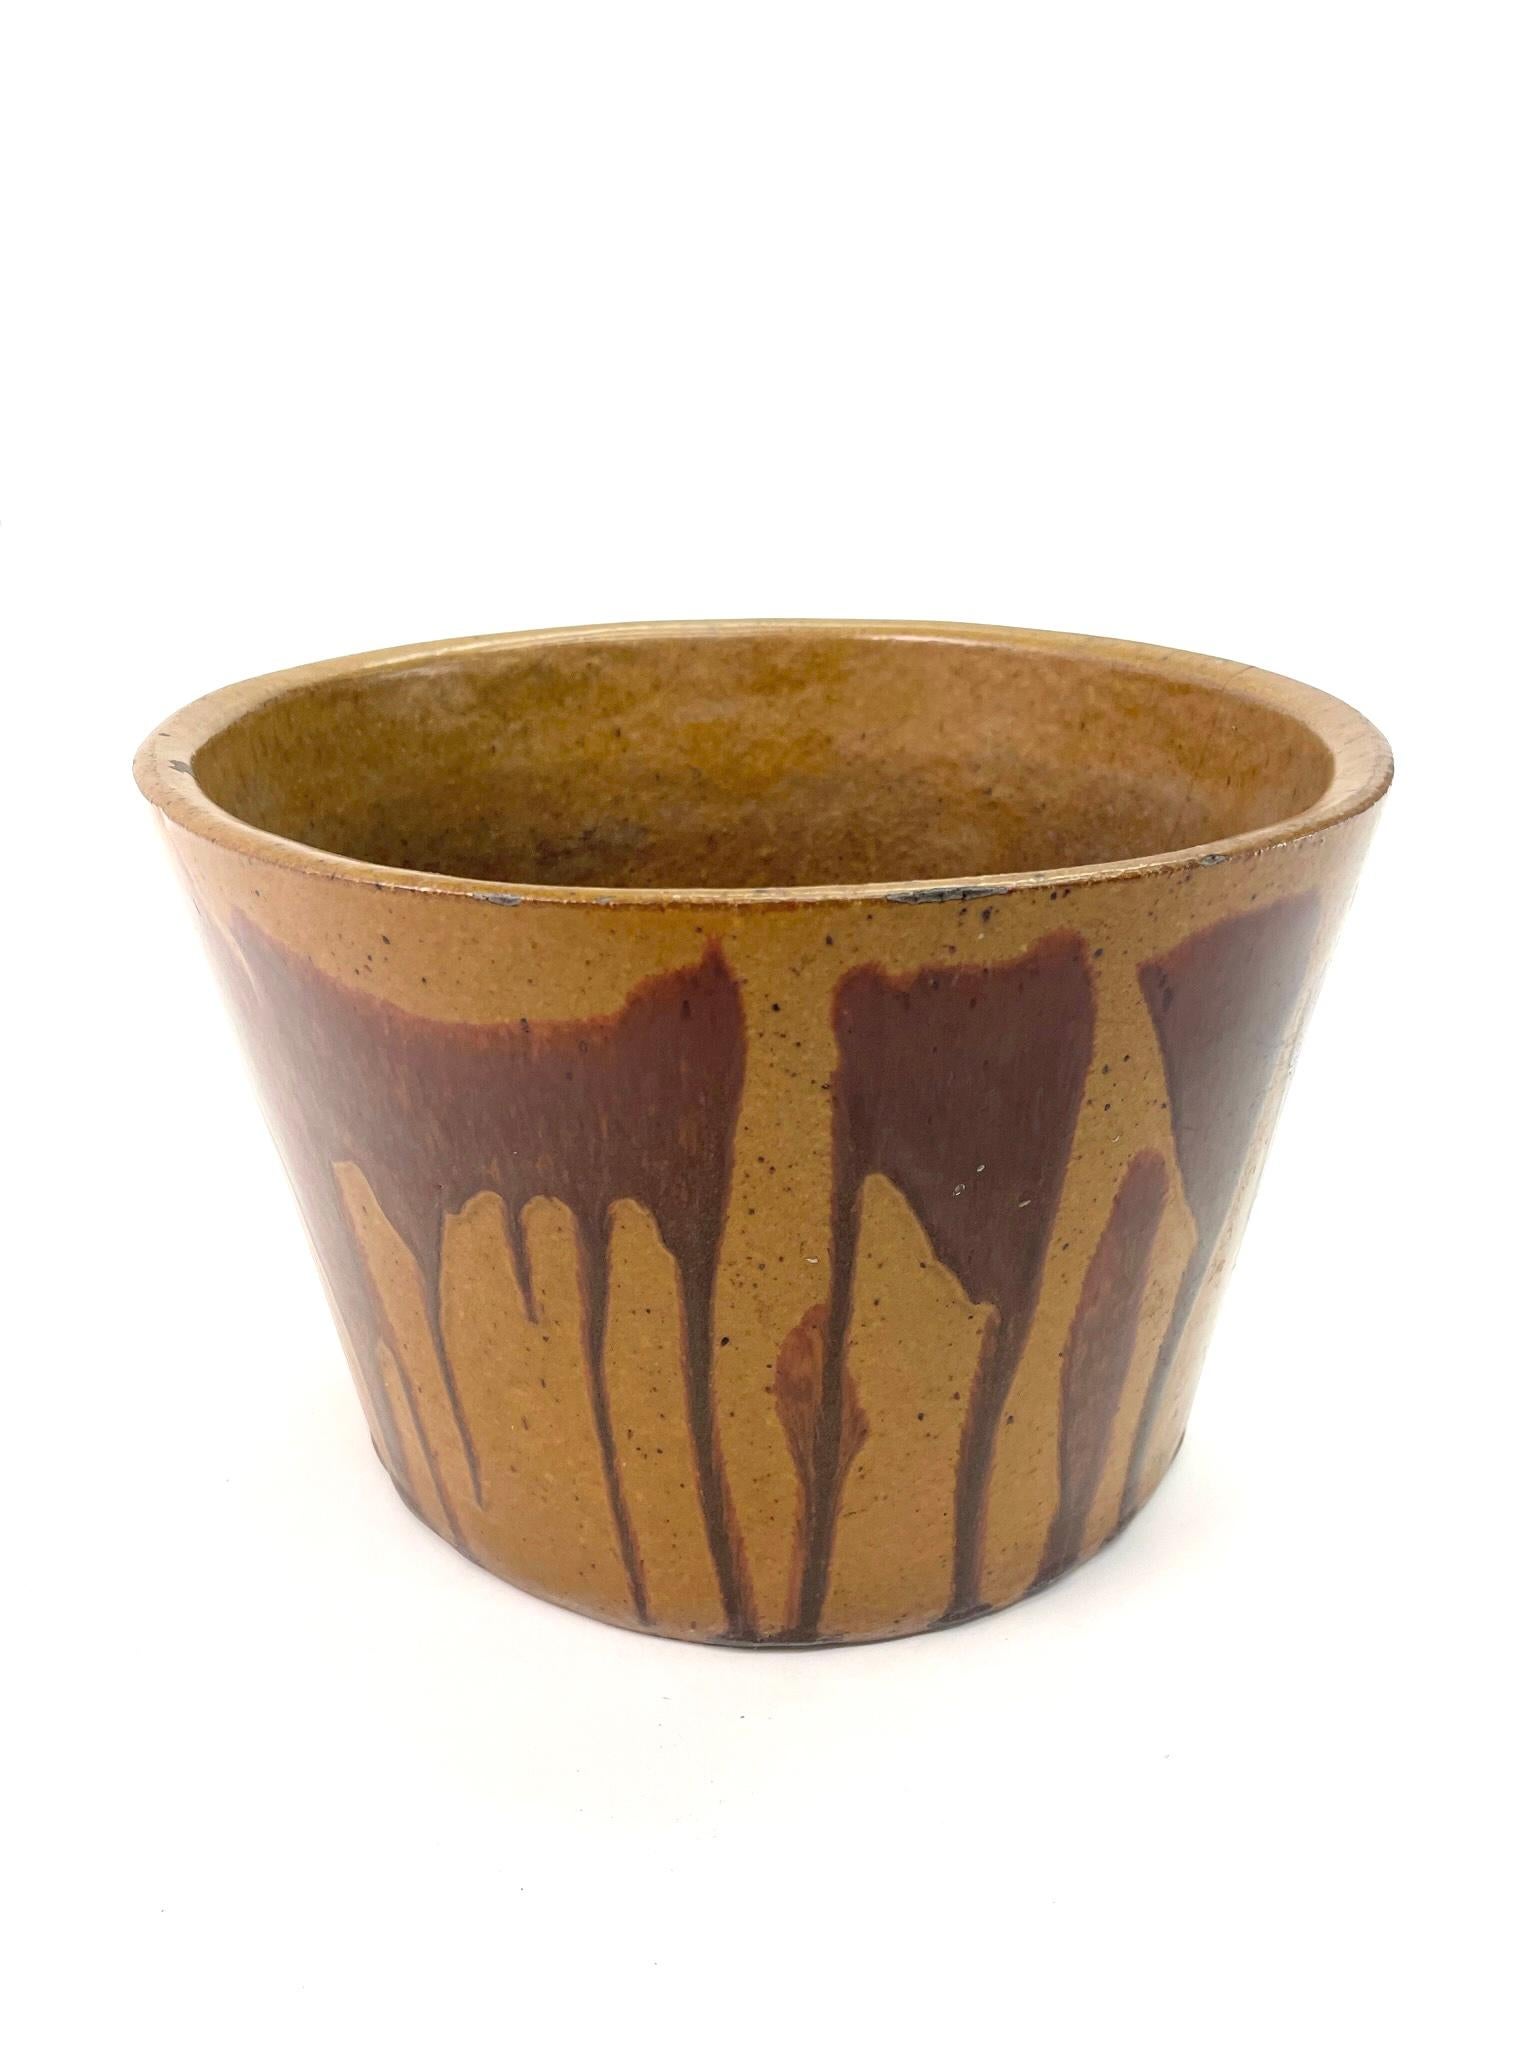 Mid-20th Century David Cressey, Flame Glazed Planter, model S-12 by Architectural Pottery